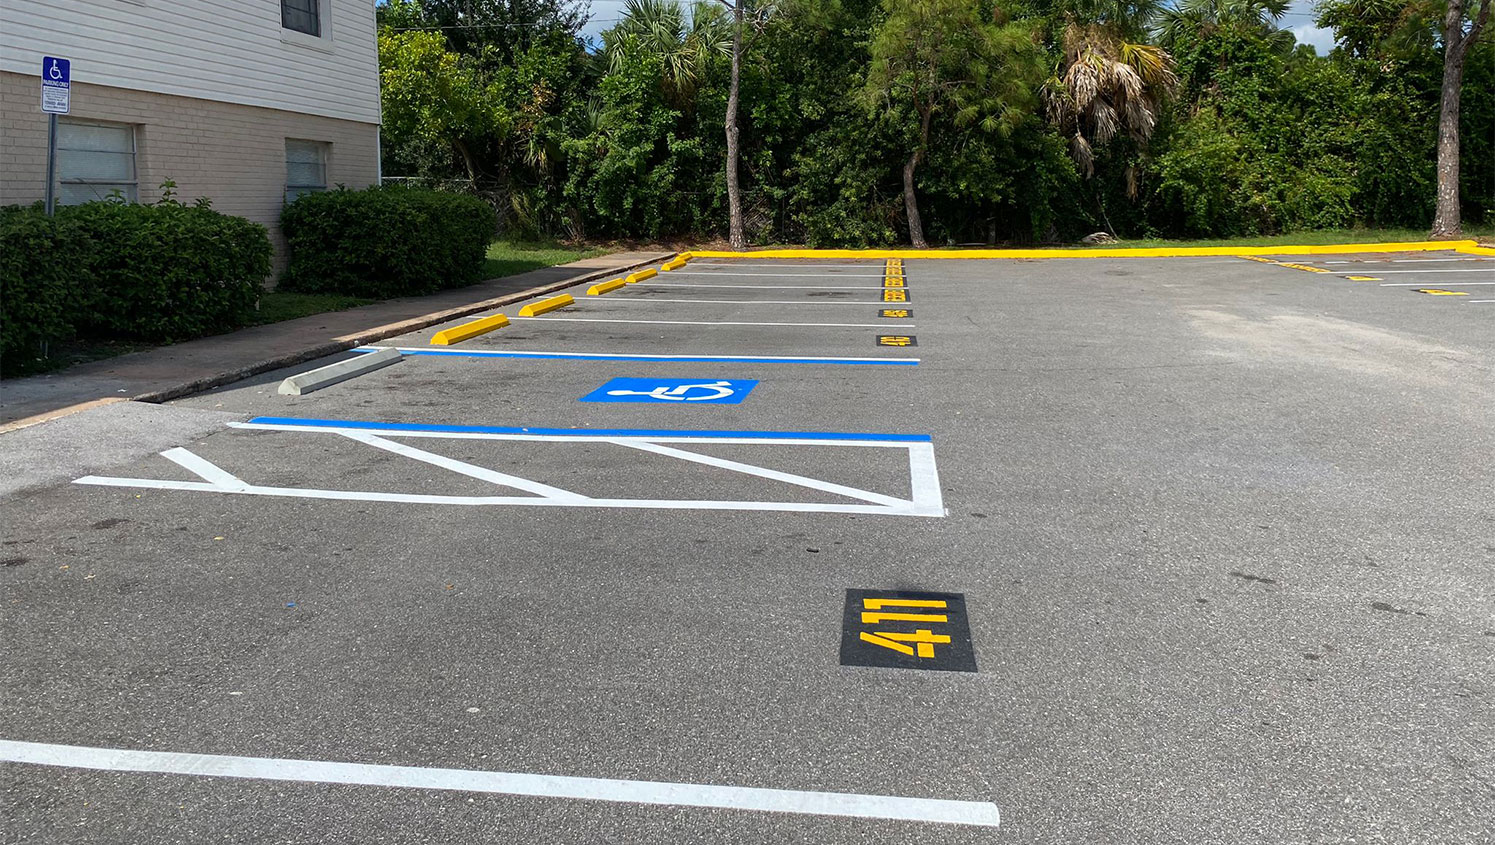 ada stall painted on asphalt with apartment number markings